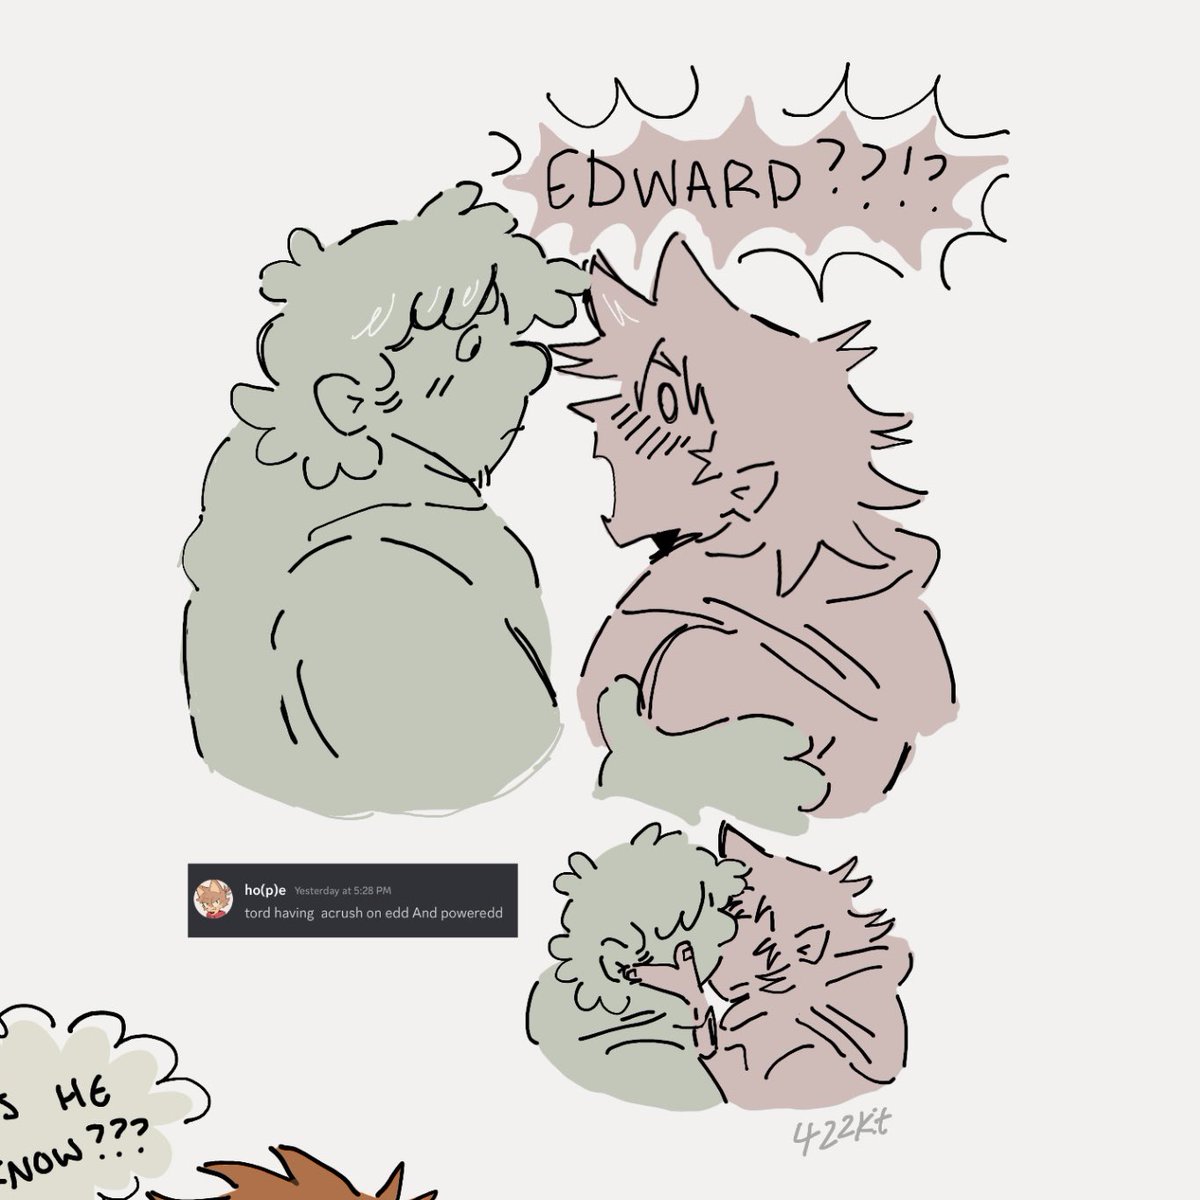 ty to both mink & my bf for helping me w doodle ideas